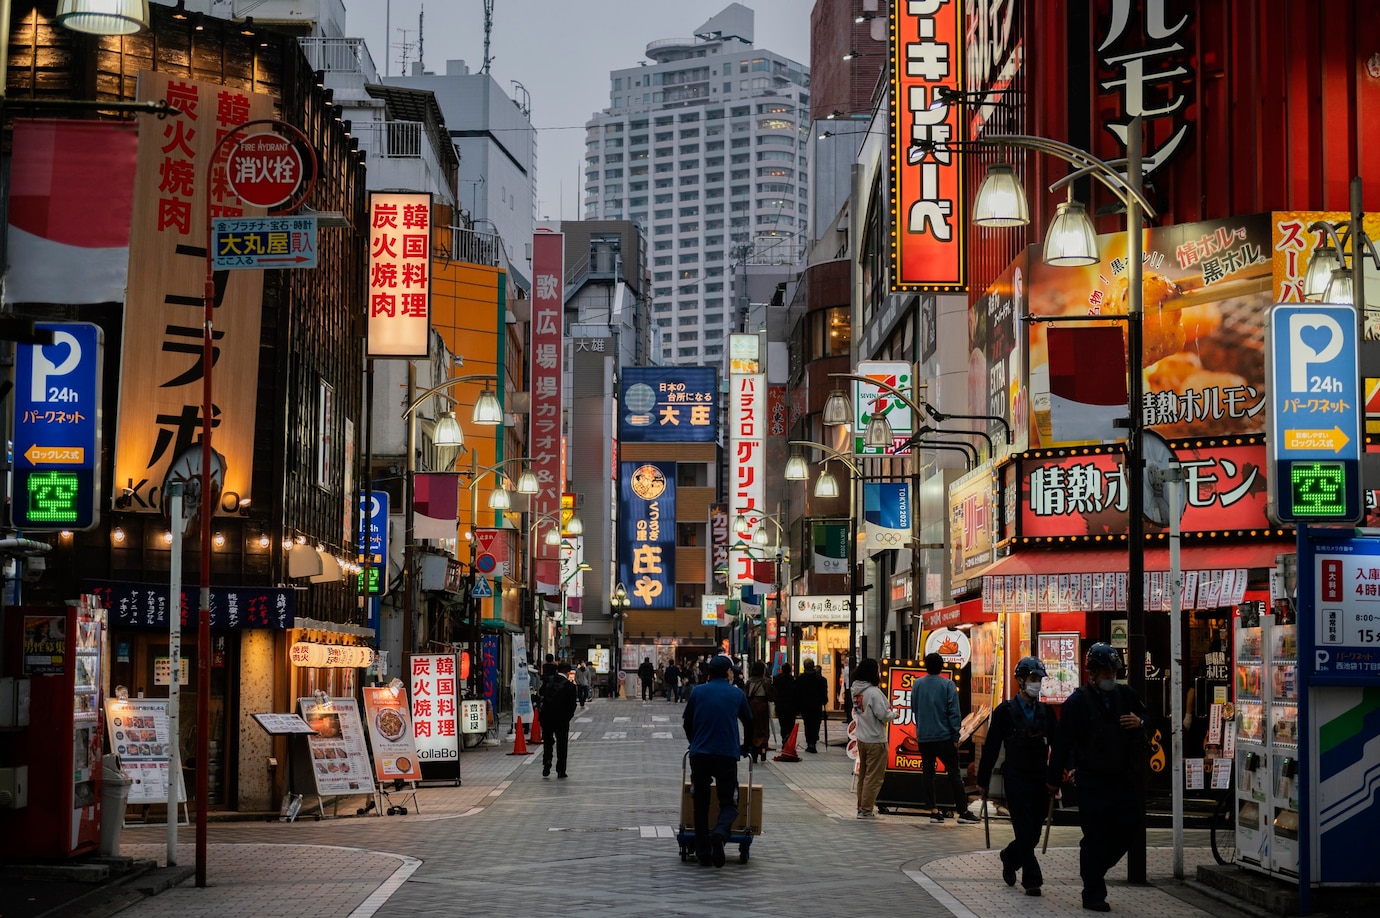 Investors have enjoyed steady returns from the Japanese real estate market